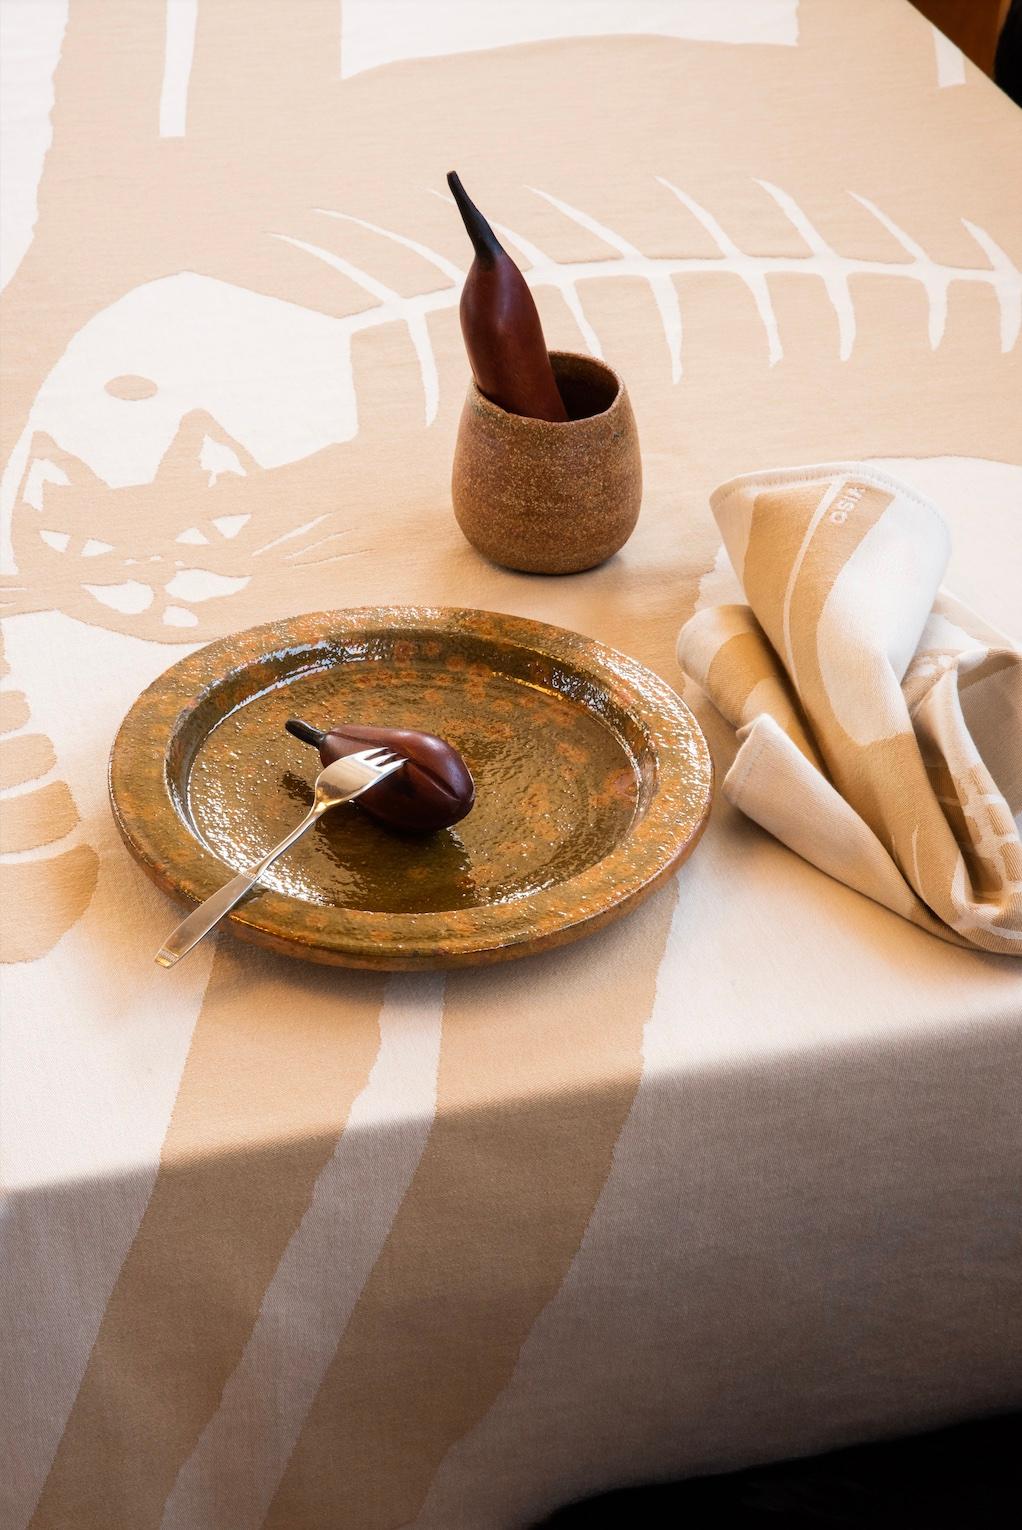 With this cotton tablecloth featuring our special cat/fish design, Viso offers you the loveliest dining experience. Woven in soft tan and light beige out of the finest Italian threads, this table setting compliments any space, either inside or